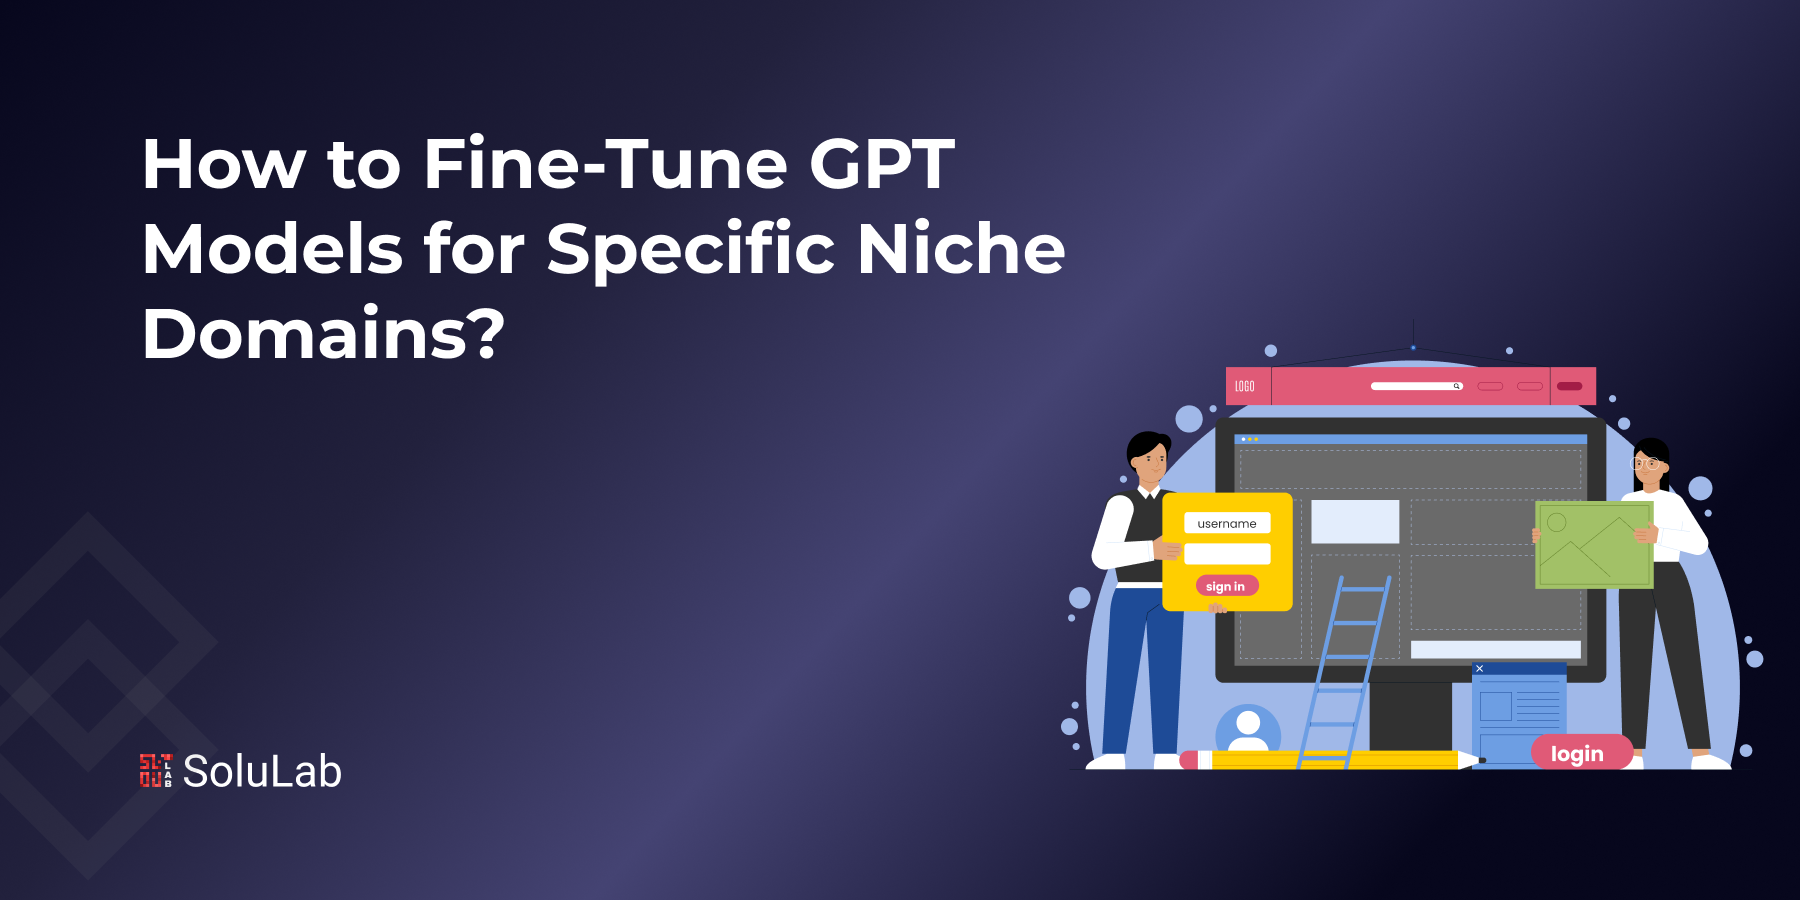 How to Fine-Tune GPT Models for Specific Niche Domains?